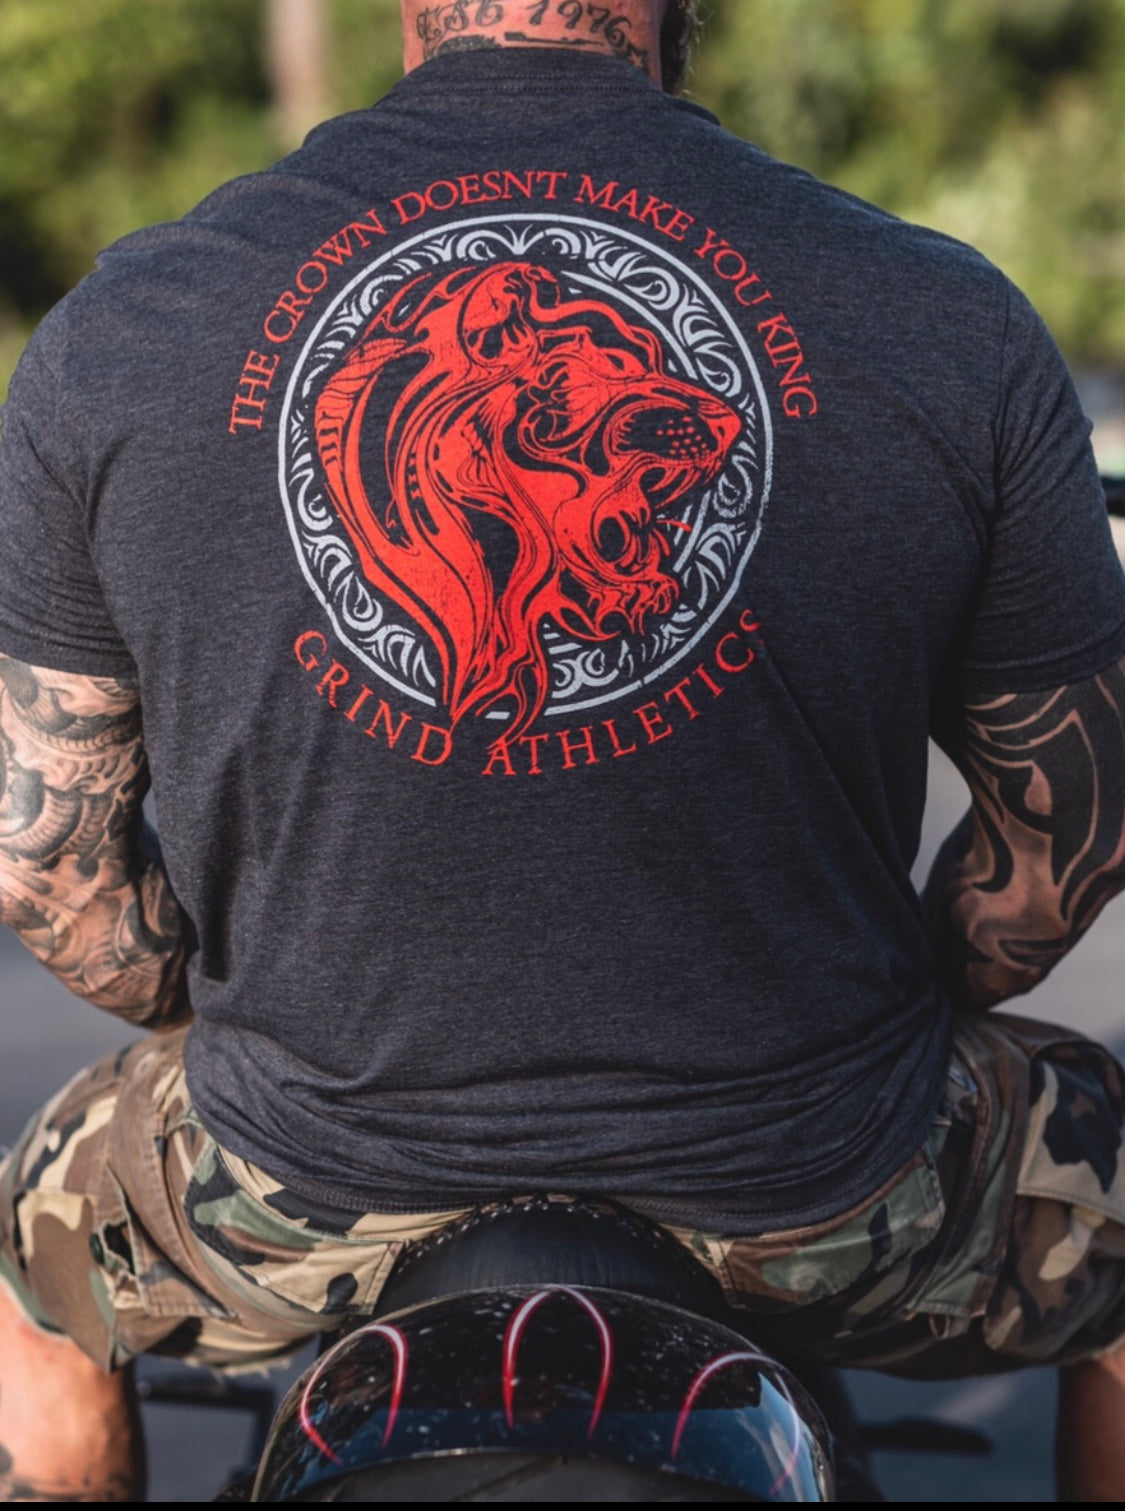 The Grind Athletics The Crown Doesn't Make You King - First Edition